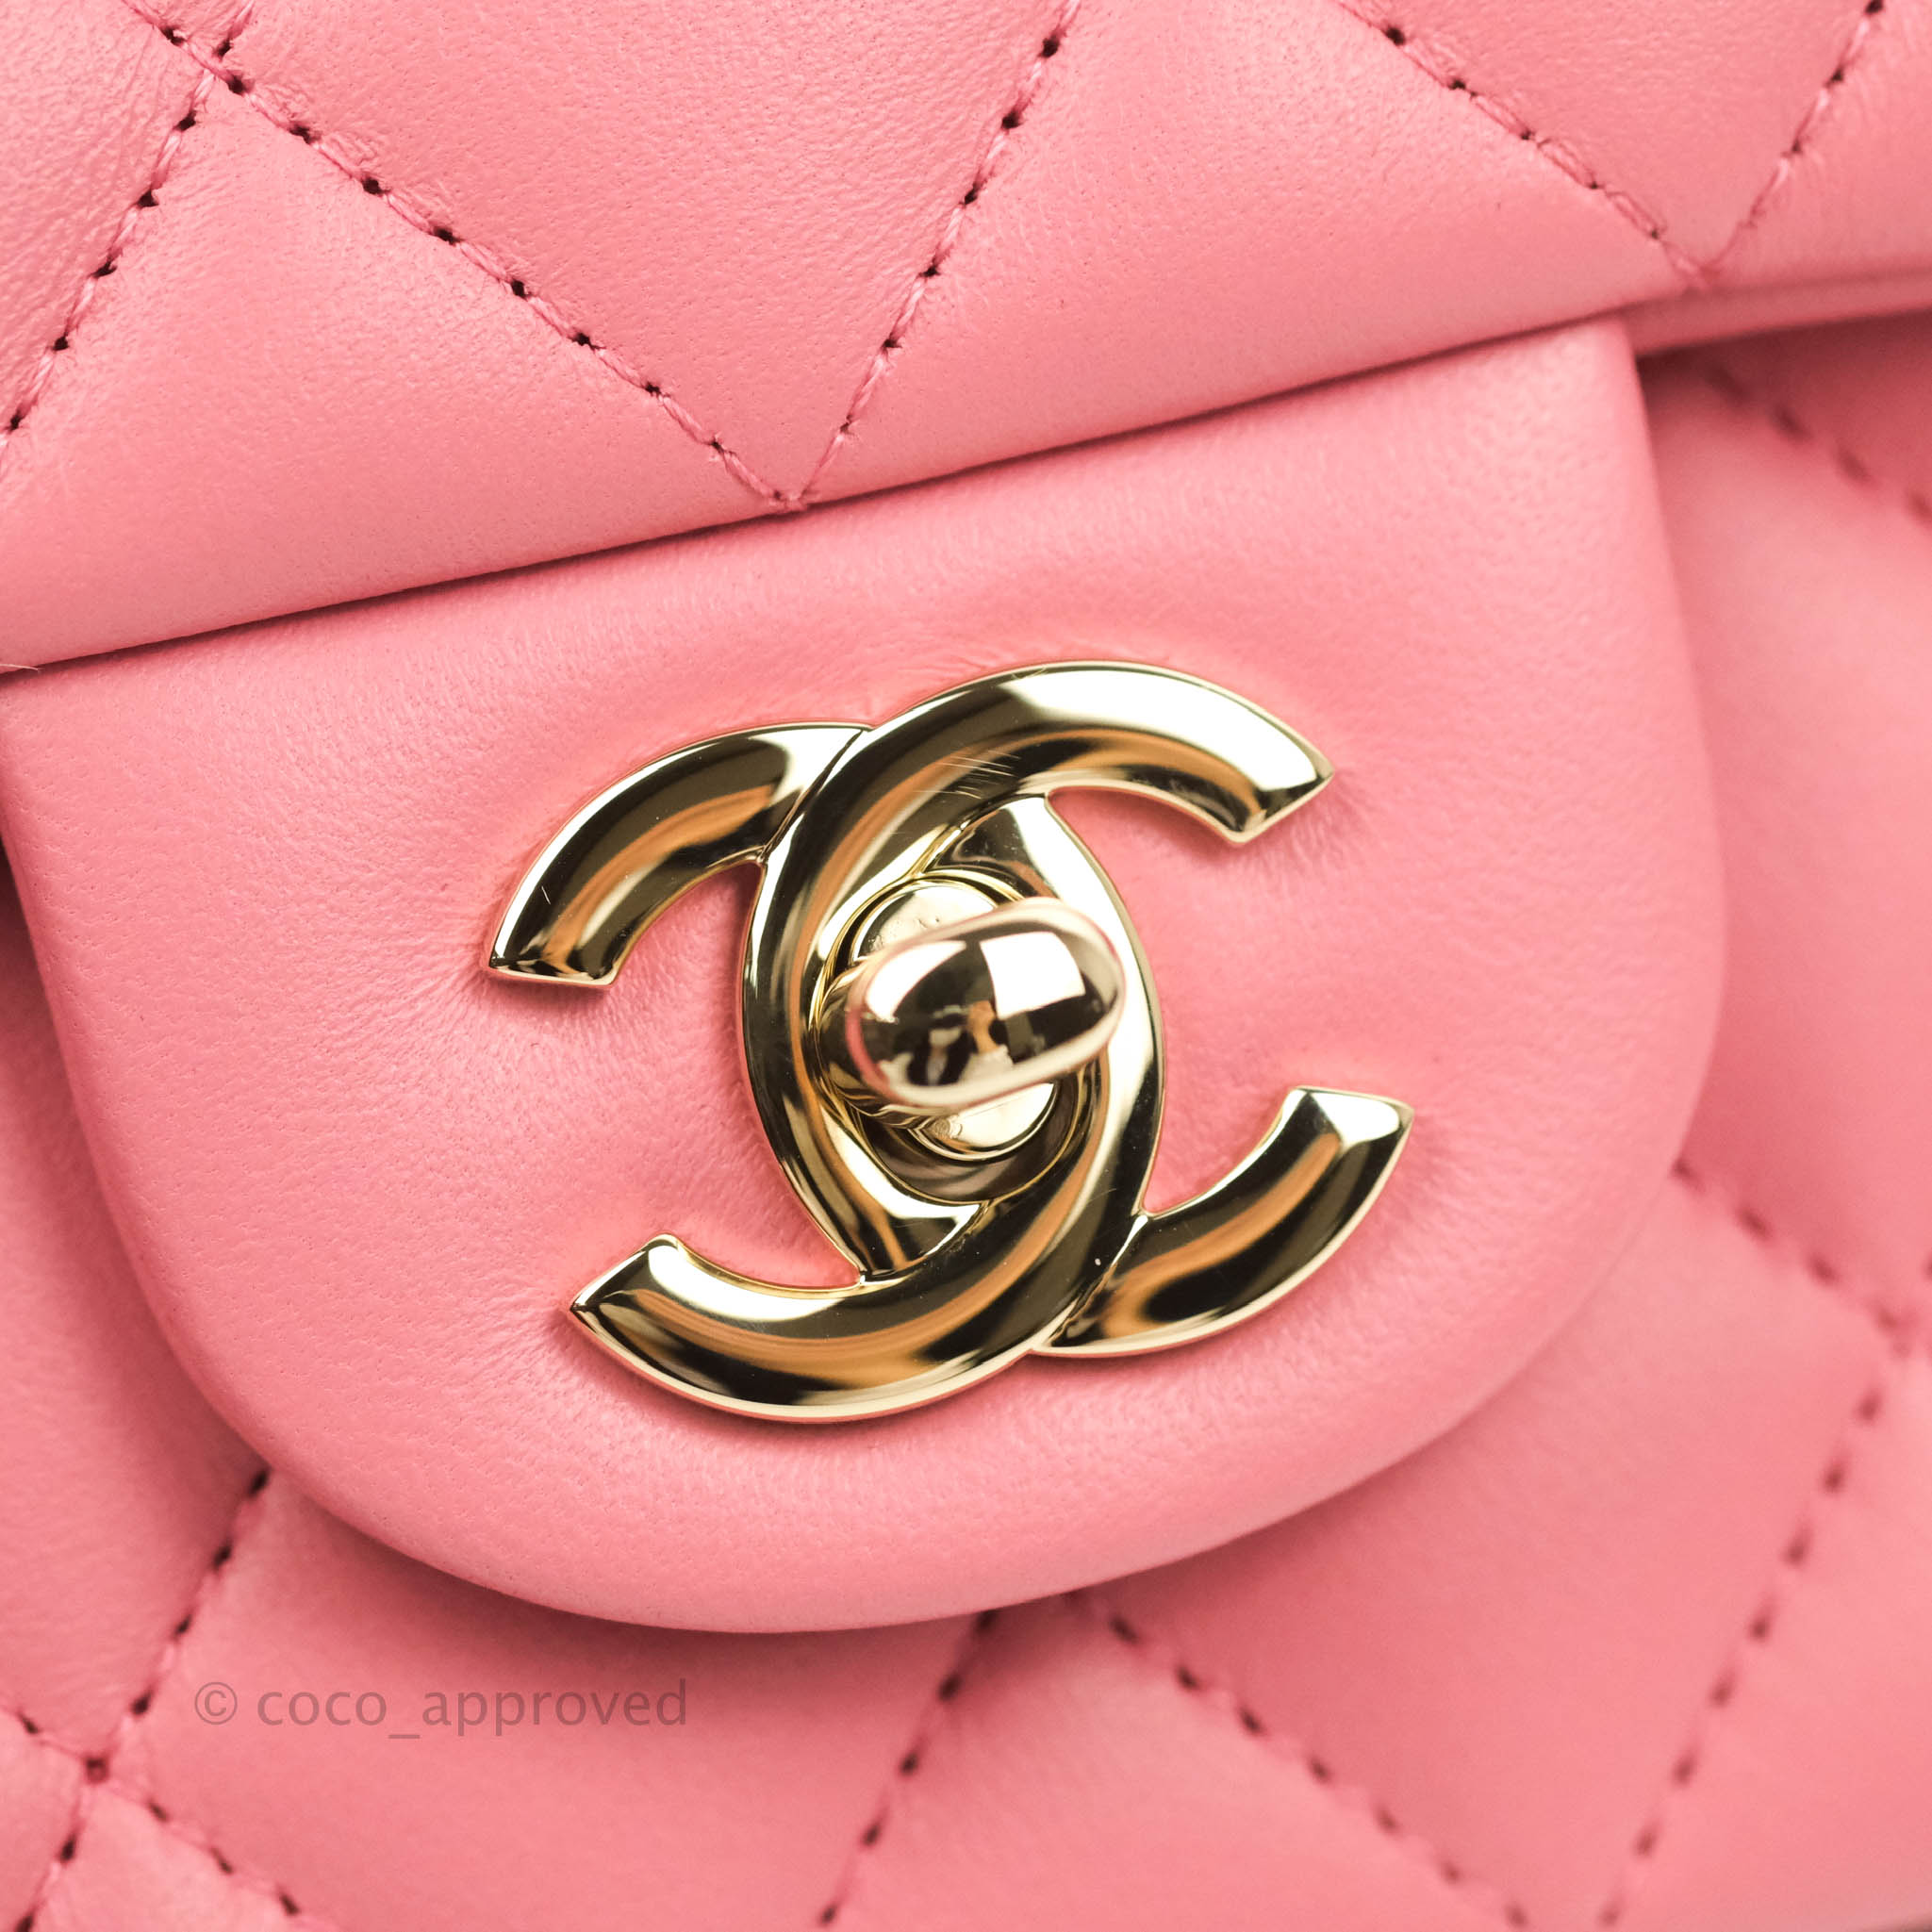 Chanel 2021 Pink Gold-Tone (Rose Gold Hardware) – Coco Approved Studio